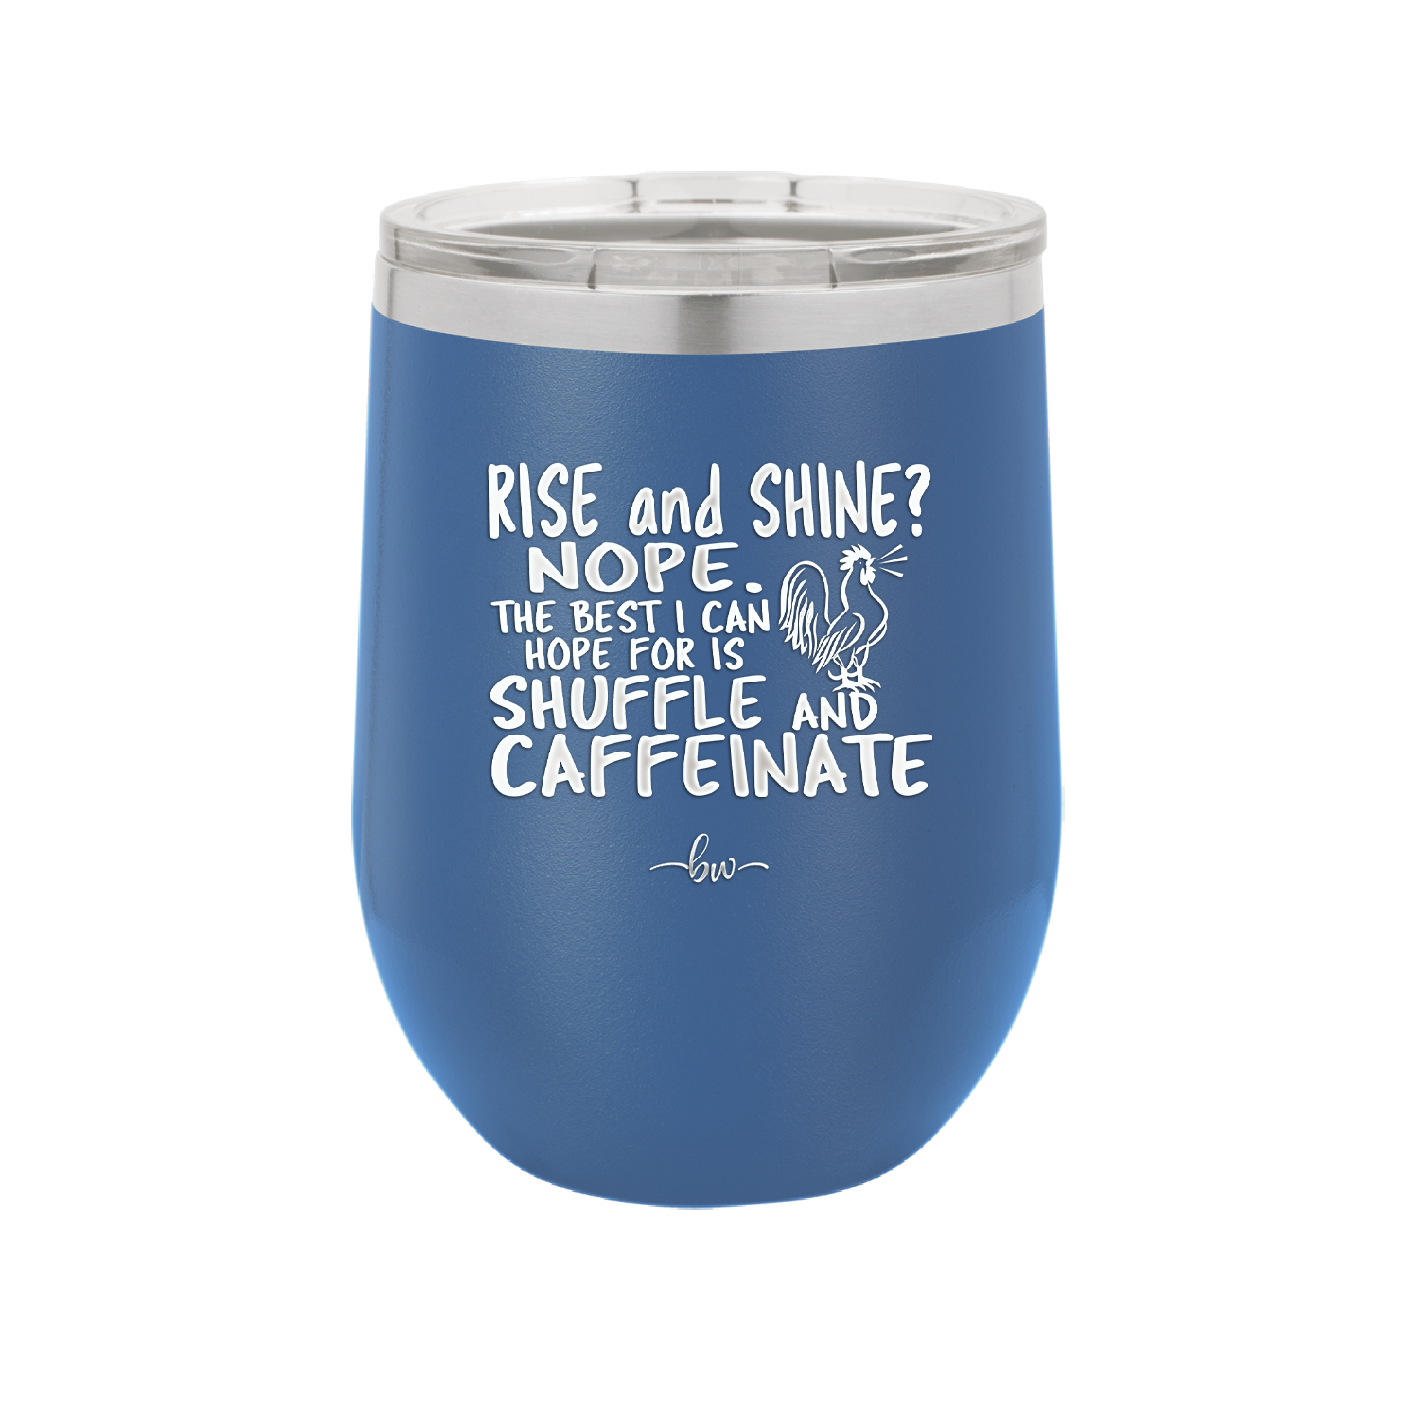 Rise and Shine Nope Best I Can Hope for is Shuffle and Caffeinate - Laser Engraved Stainless Steel Drinkware - 2285 -